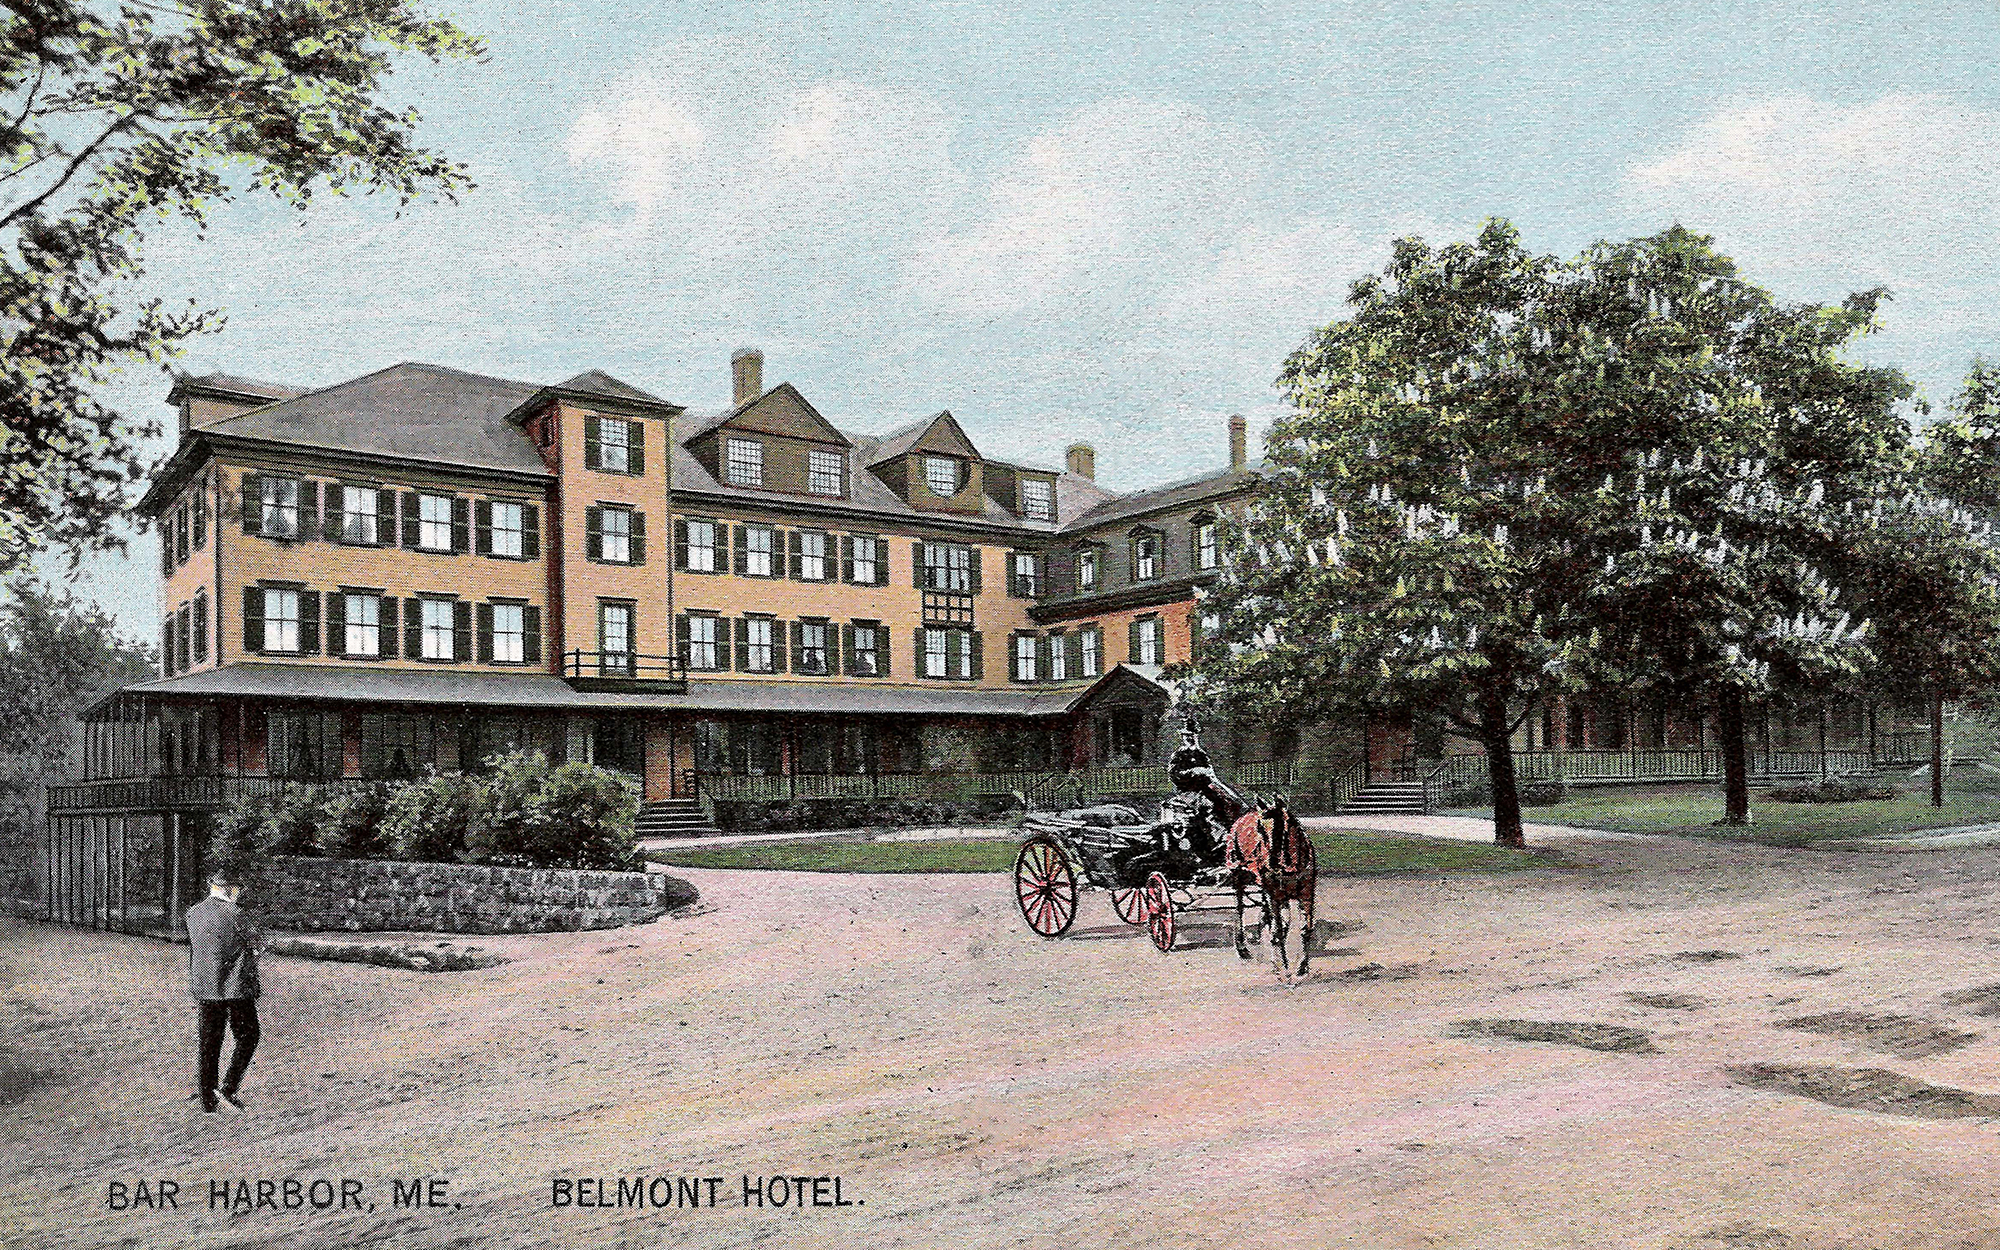 Historic image of the Belmont Hotel in Bar Harbor Maine